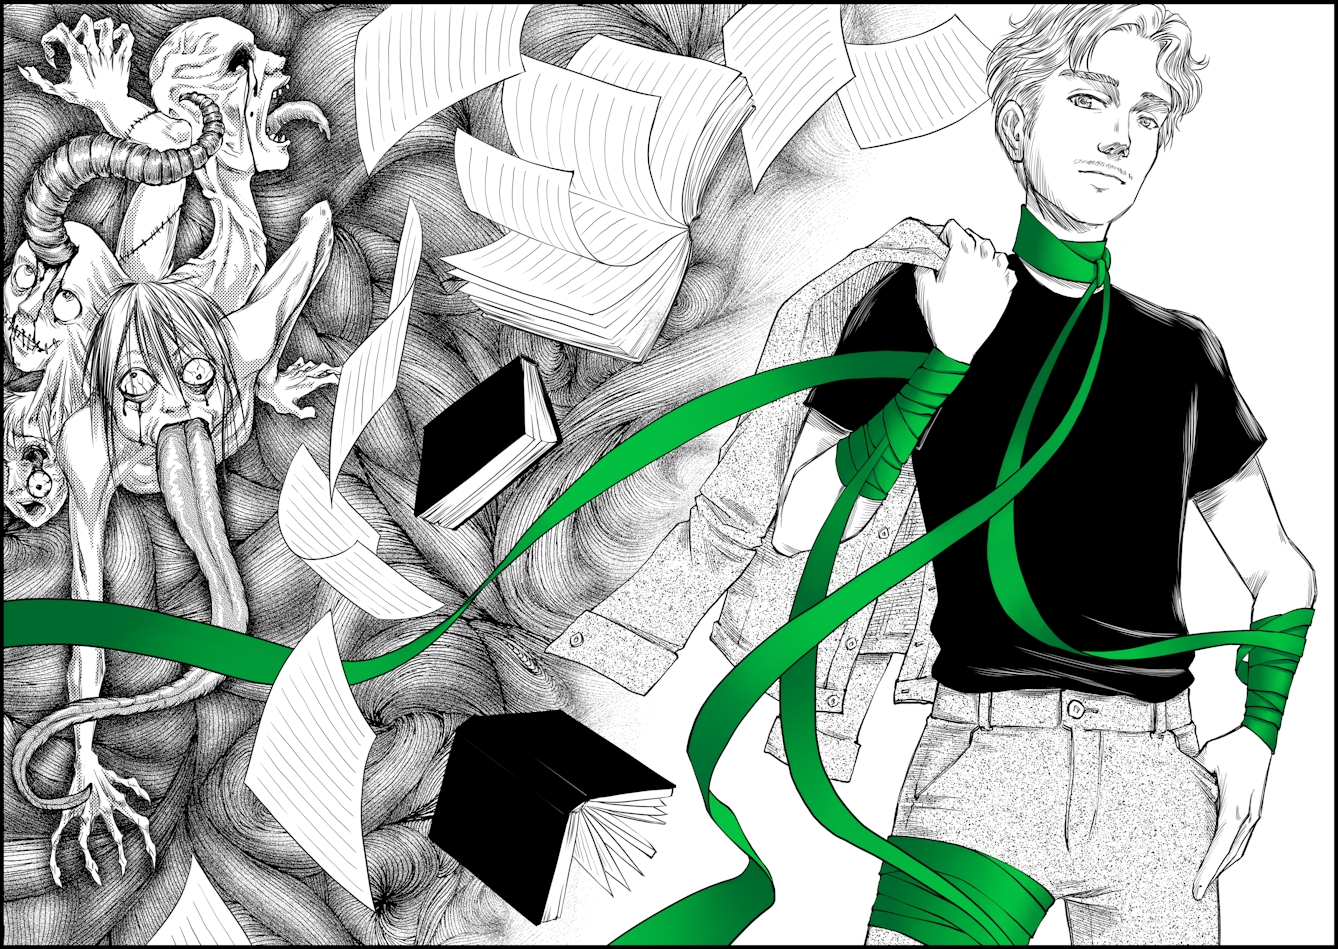 Illustration in the style of Manga graphic novels, showing a young man standing tall and proud, a green ribbon wrapped around his neck, arms and legs.Behind him to the right are illustrations of falling books and pages, and Grotesque faces with tortured expressions, eyes bulging and long twisted tongues. 